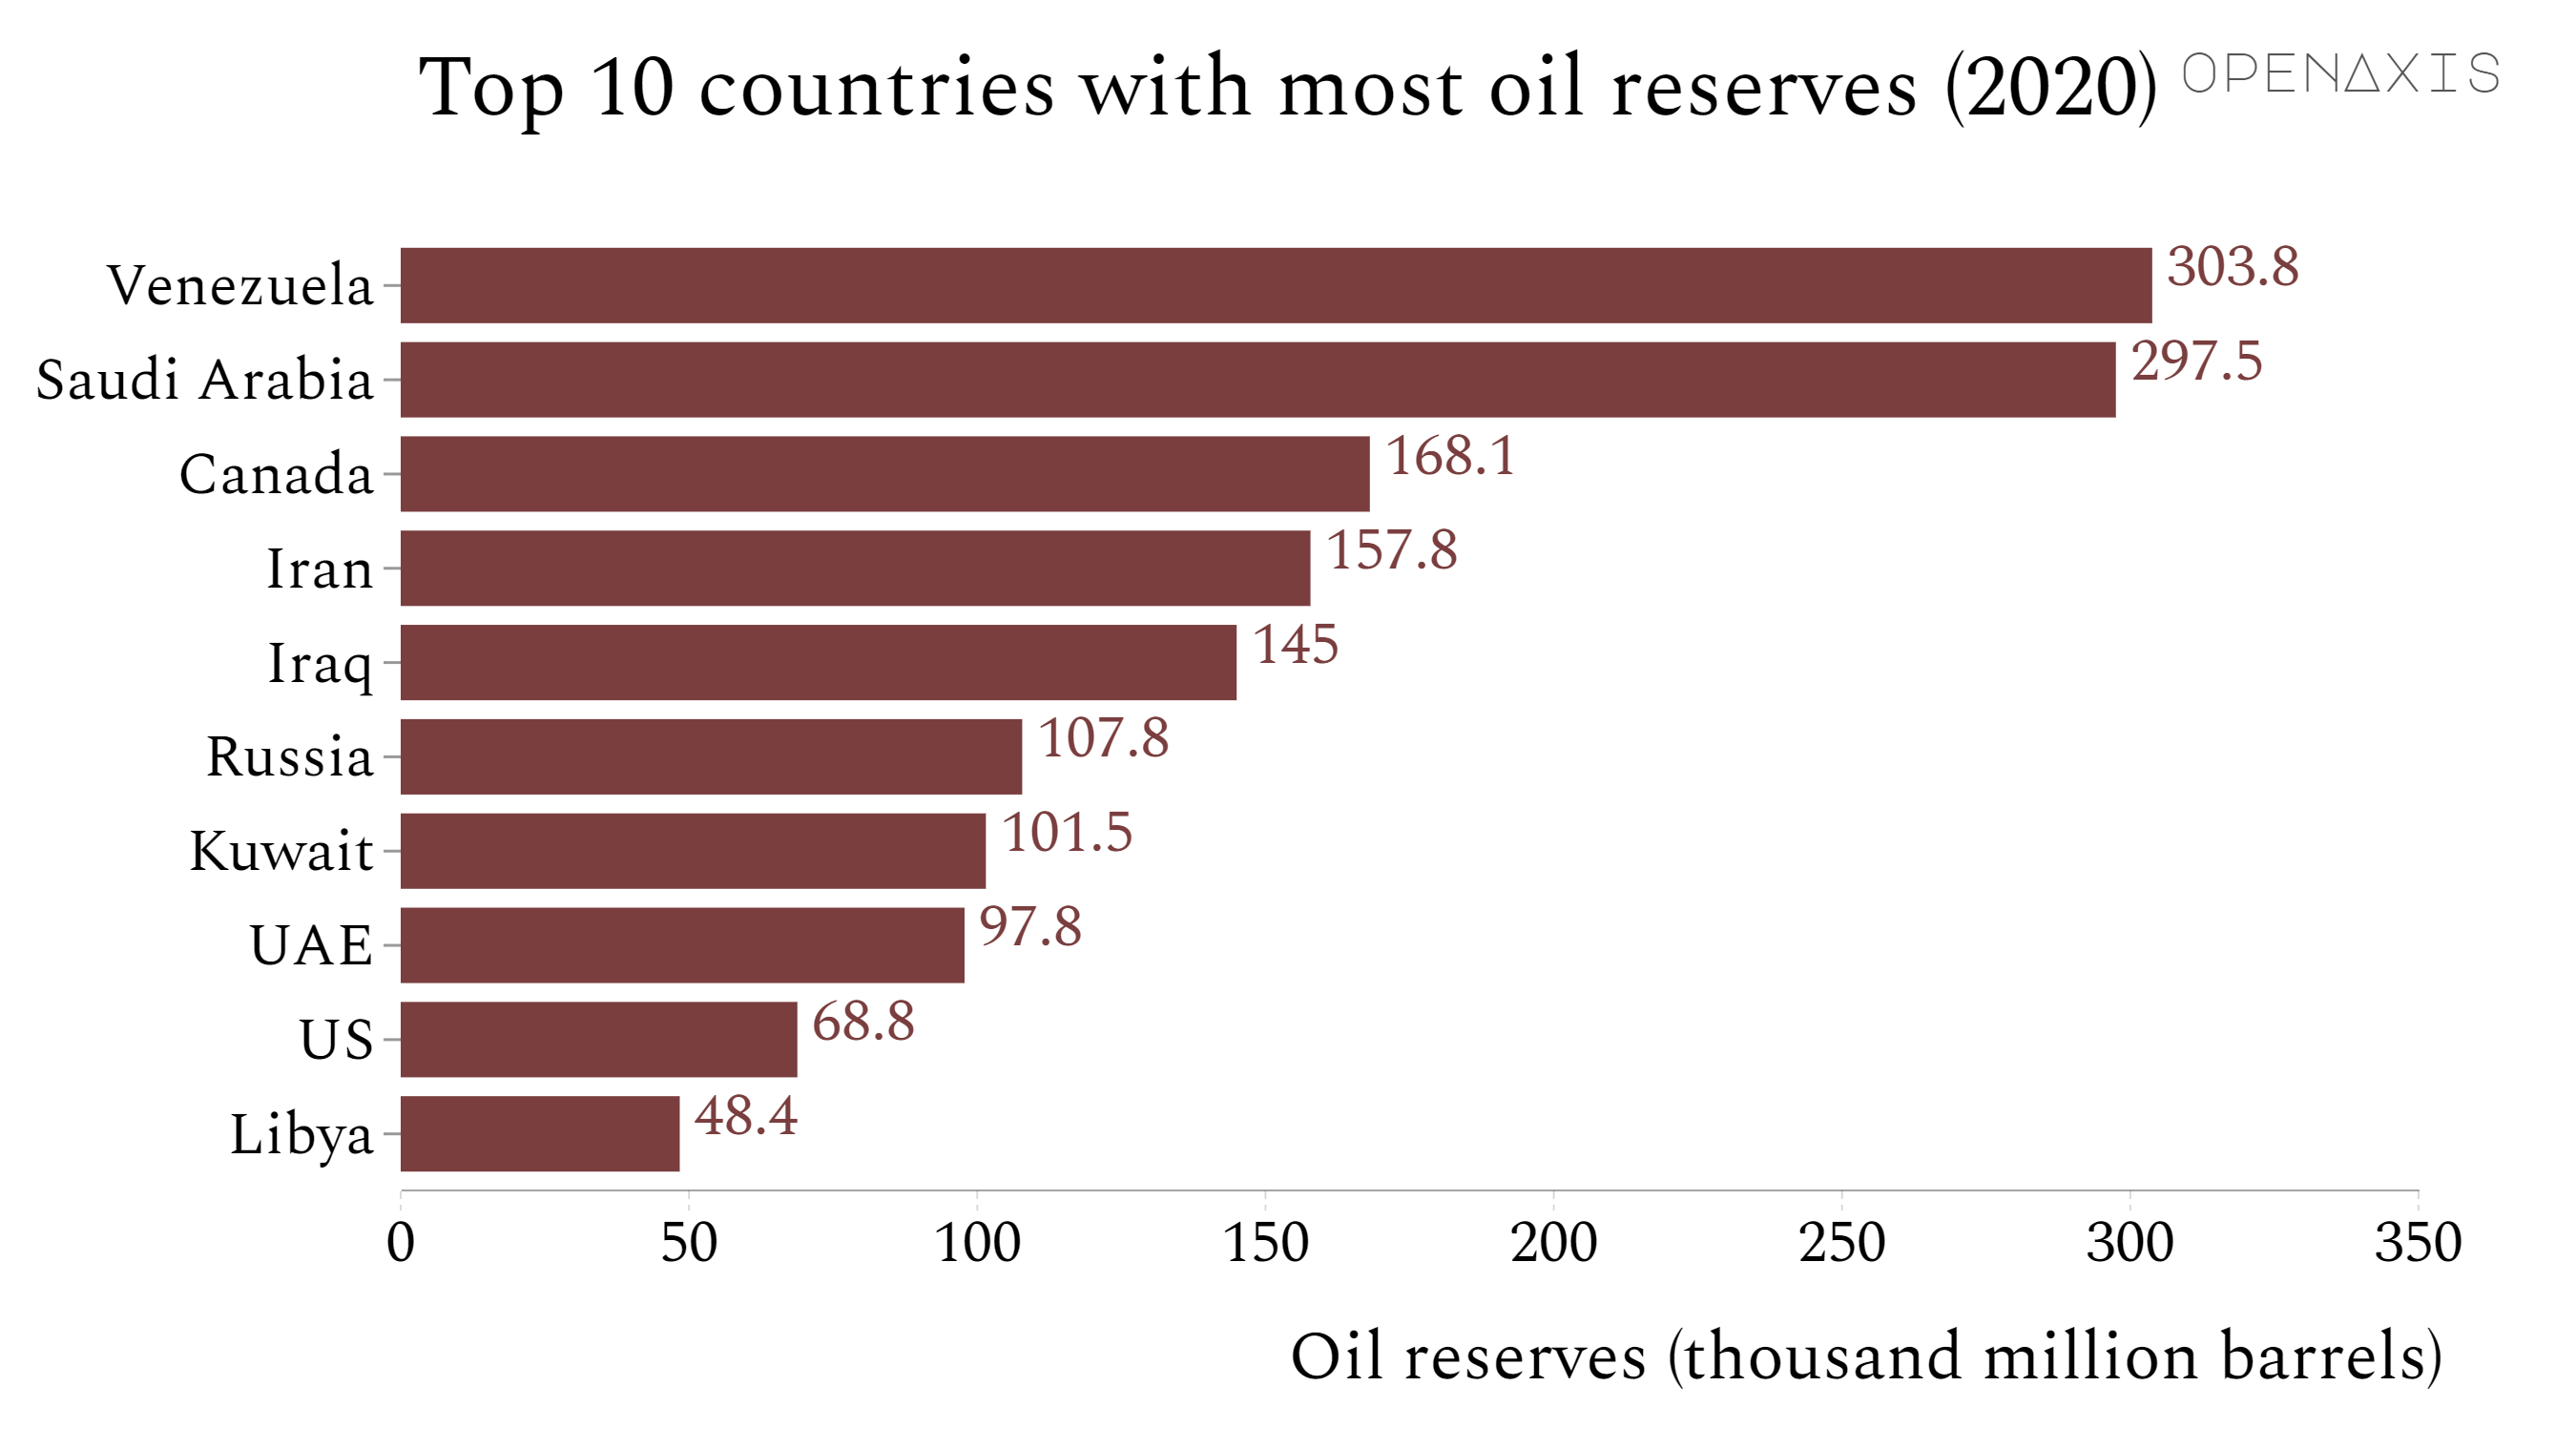 <p>Global proved oil reserves were 1732 billion barrels at the end of 2020, down 2 billion barrels versus 2019. OPEC holds 70.2% of global reserves. The top countries in terms of reserves are Venezuela (17.5% of global reserves), closely followed by Saudi Arabia (17.2%) and Canada (9.7%).</p><p><br /></p><p><span data-index="0" data-denotation-char data-id="0" data-value="&lt;a href=&quot;/search?q=%23energy&quot; target=_self&gt;#energy" data-link="/search?q=%23energy">﻿<span contenteditable="false"><span></span><a href="/search?q=%23energy" target="_self">#energy</a></span>﻿</span> <span data-index="0" data-denotation-char data-id="0" data-value="&lt;a href=&quot;/search?q=%23oil&quot; target=_self&gt;#oil" data-link="/search?q=%23oil">﻿<span contenteditable="false"><span></span><a href="/search?q=%23oil" target="_self">#oil</a></span>﻿</span> <span data-index="0" data-denotation-char data-id="0" data-value="&lt;a href=&quot;/search?q=%23trade&quot; target=_self&gt;#trade" data-link="/search?q=%23trade">﻿<span contenteditable="false"><span></span><a href="/search?q=%23trade" target="_self">#trade</a></span>﻿</span></p><p><br /></p><p>Source: <a href="/data/3798" target="_blank">BP - Statistical Review of World Energy 2021 Report</a></p><p><br /></p>